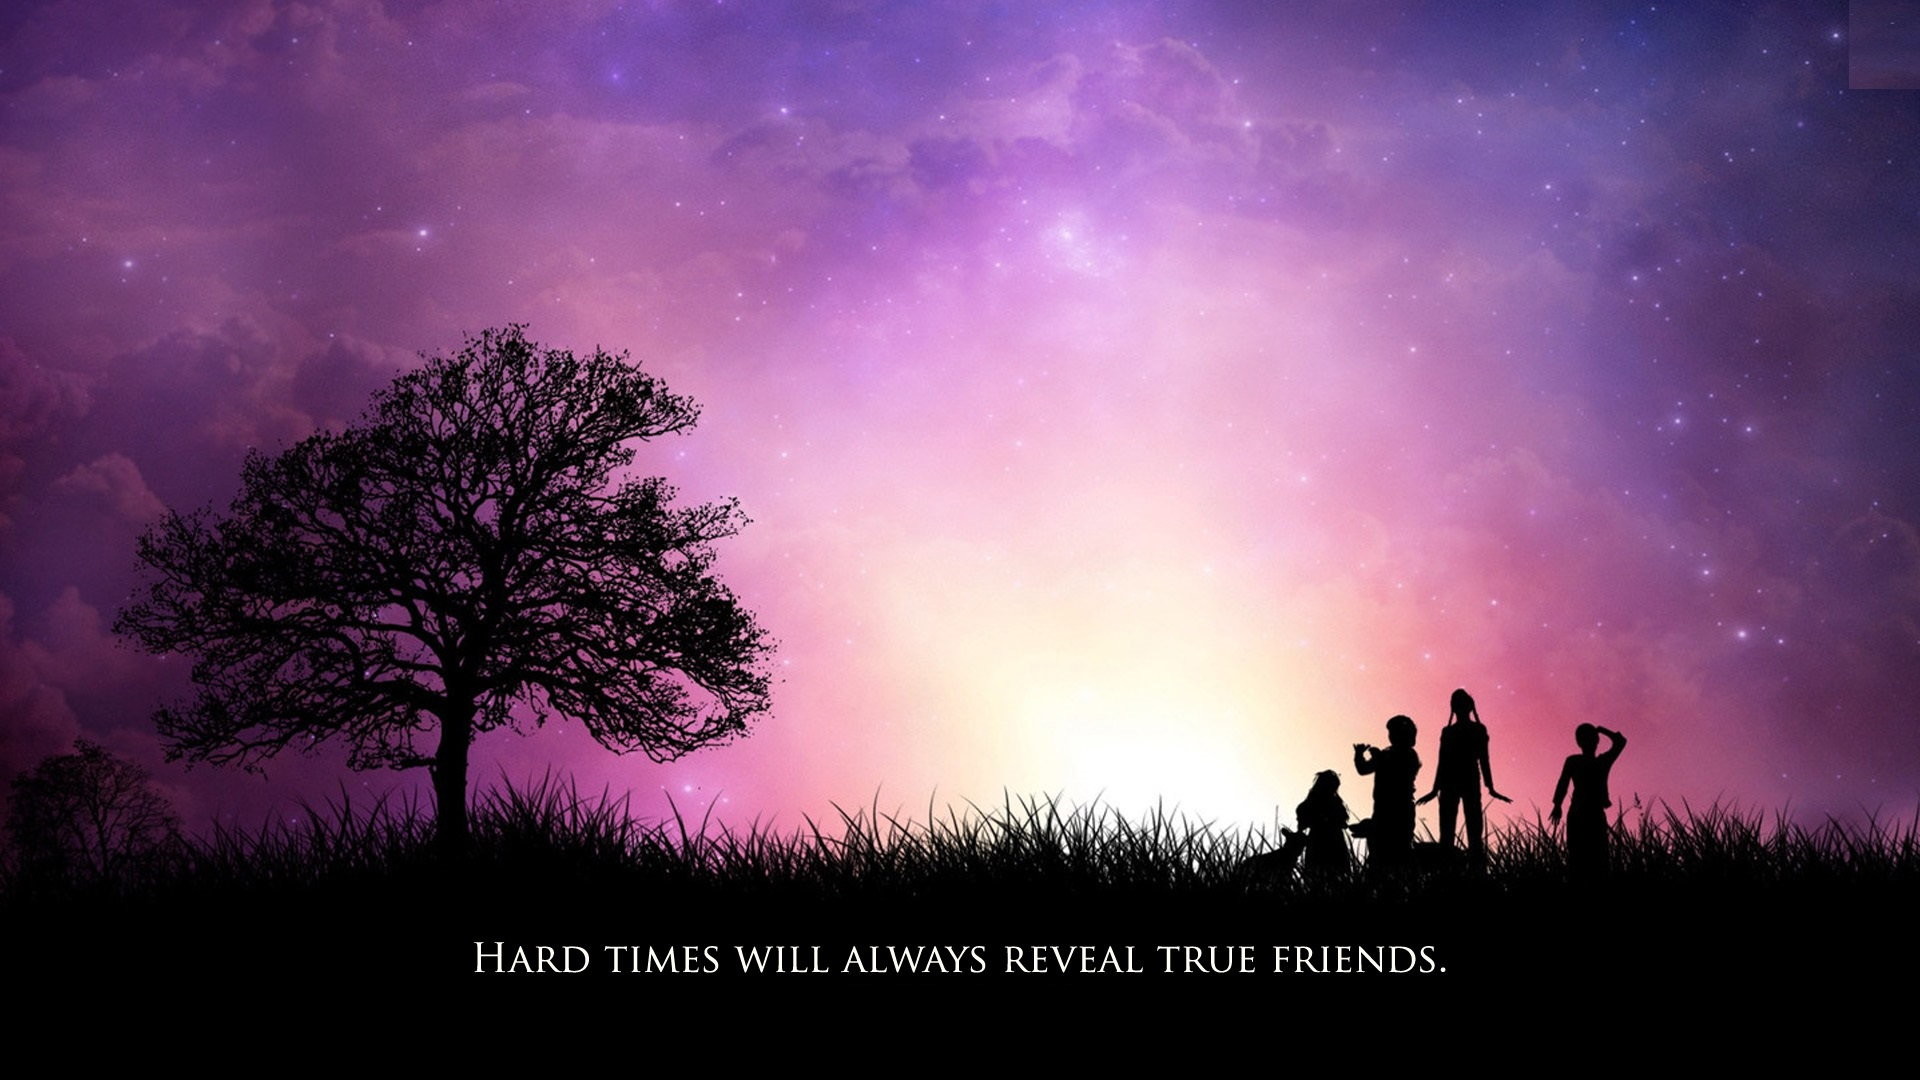 1920x1080 Hd Images Of Best Friend Quotes : Friendship quotes hd wallpaper high  definition